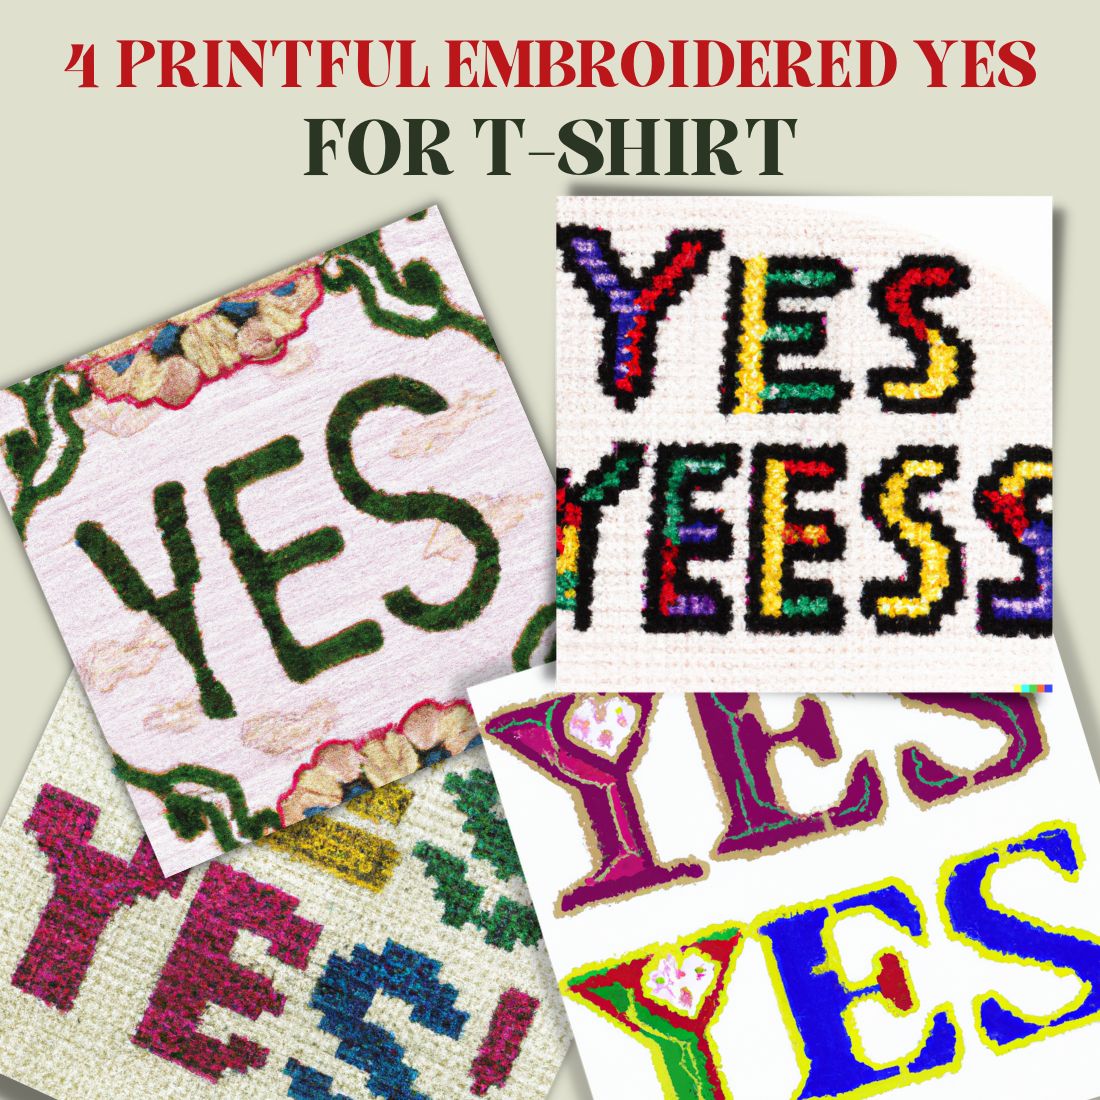 Printful embroidered YES design for T-shirt cover image.